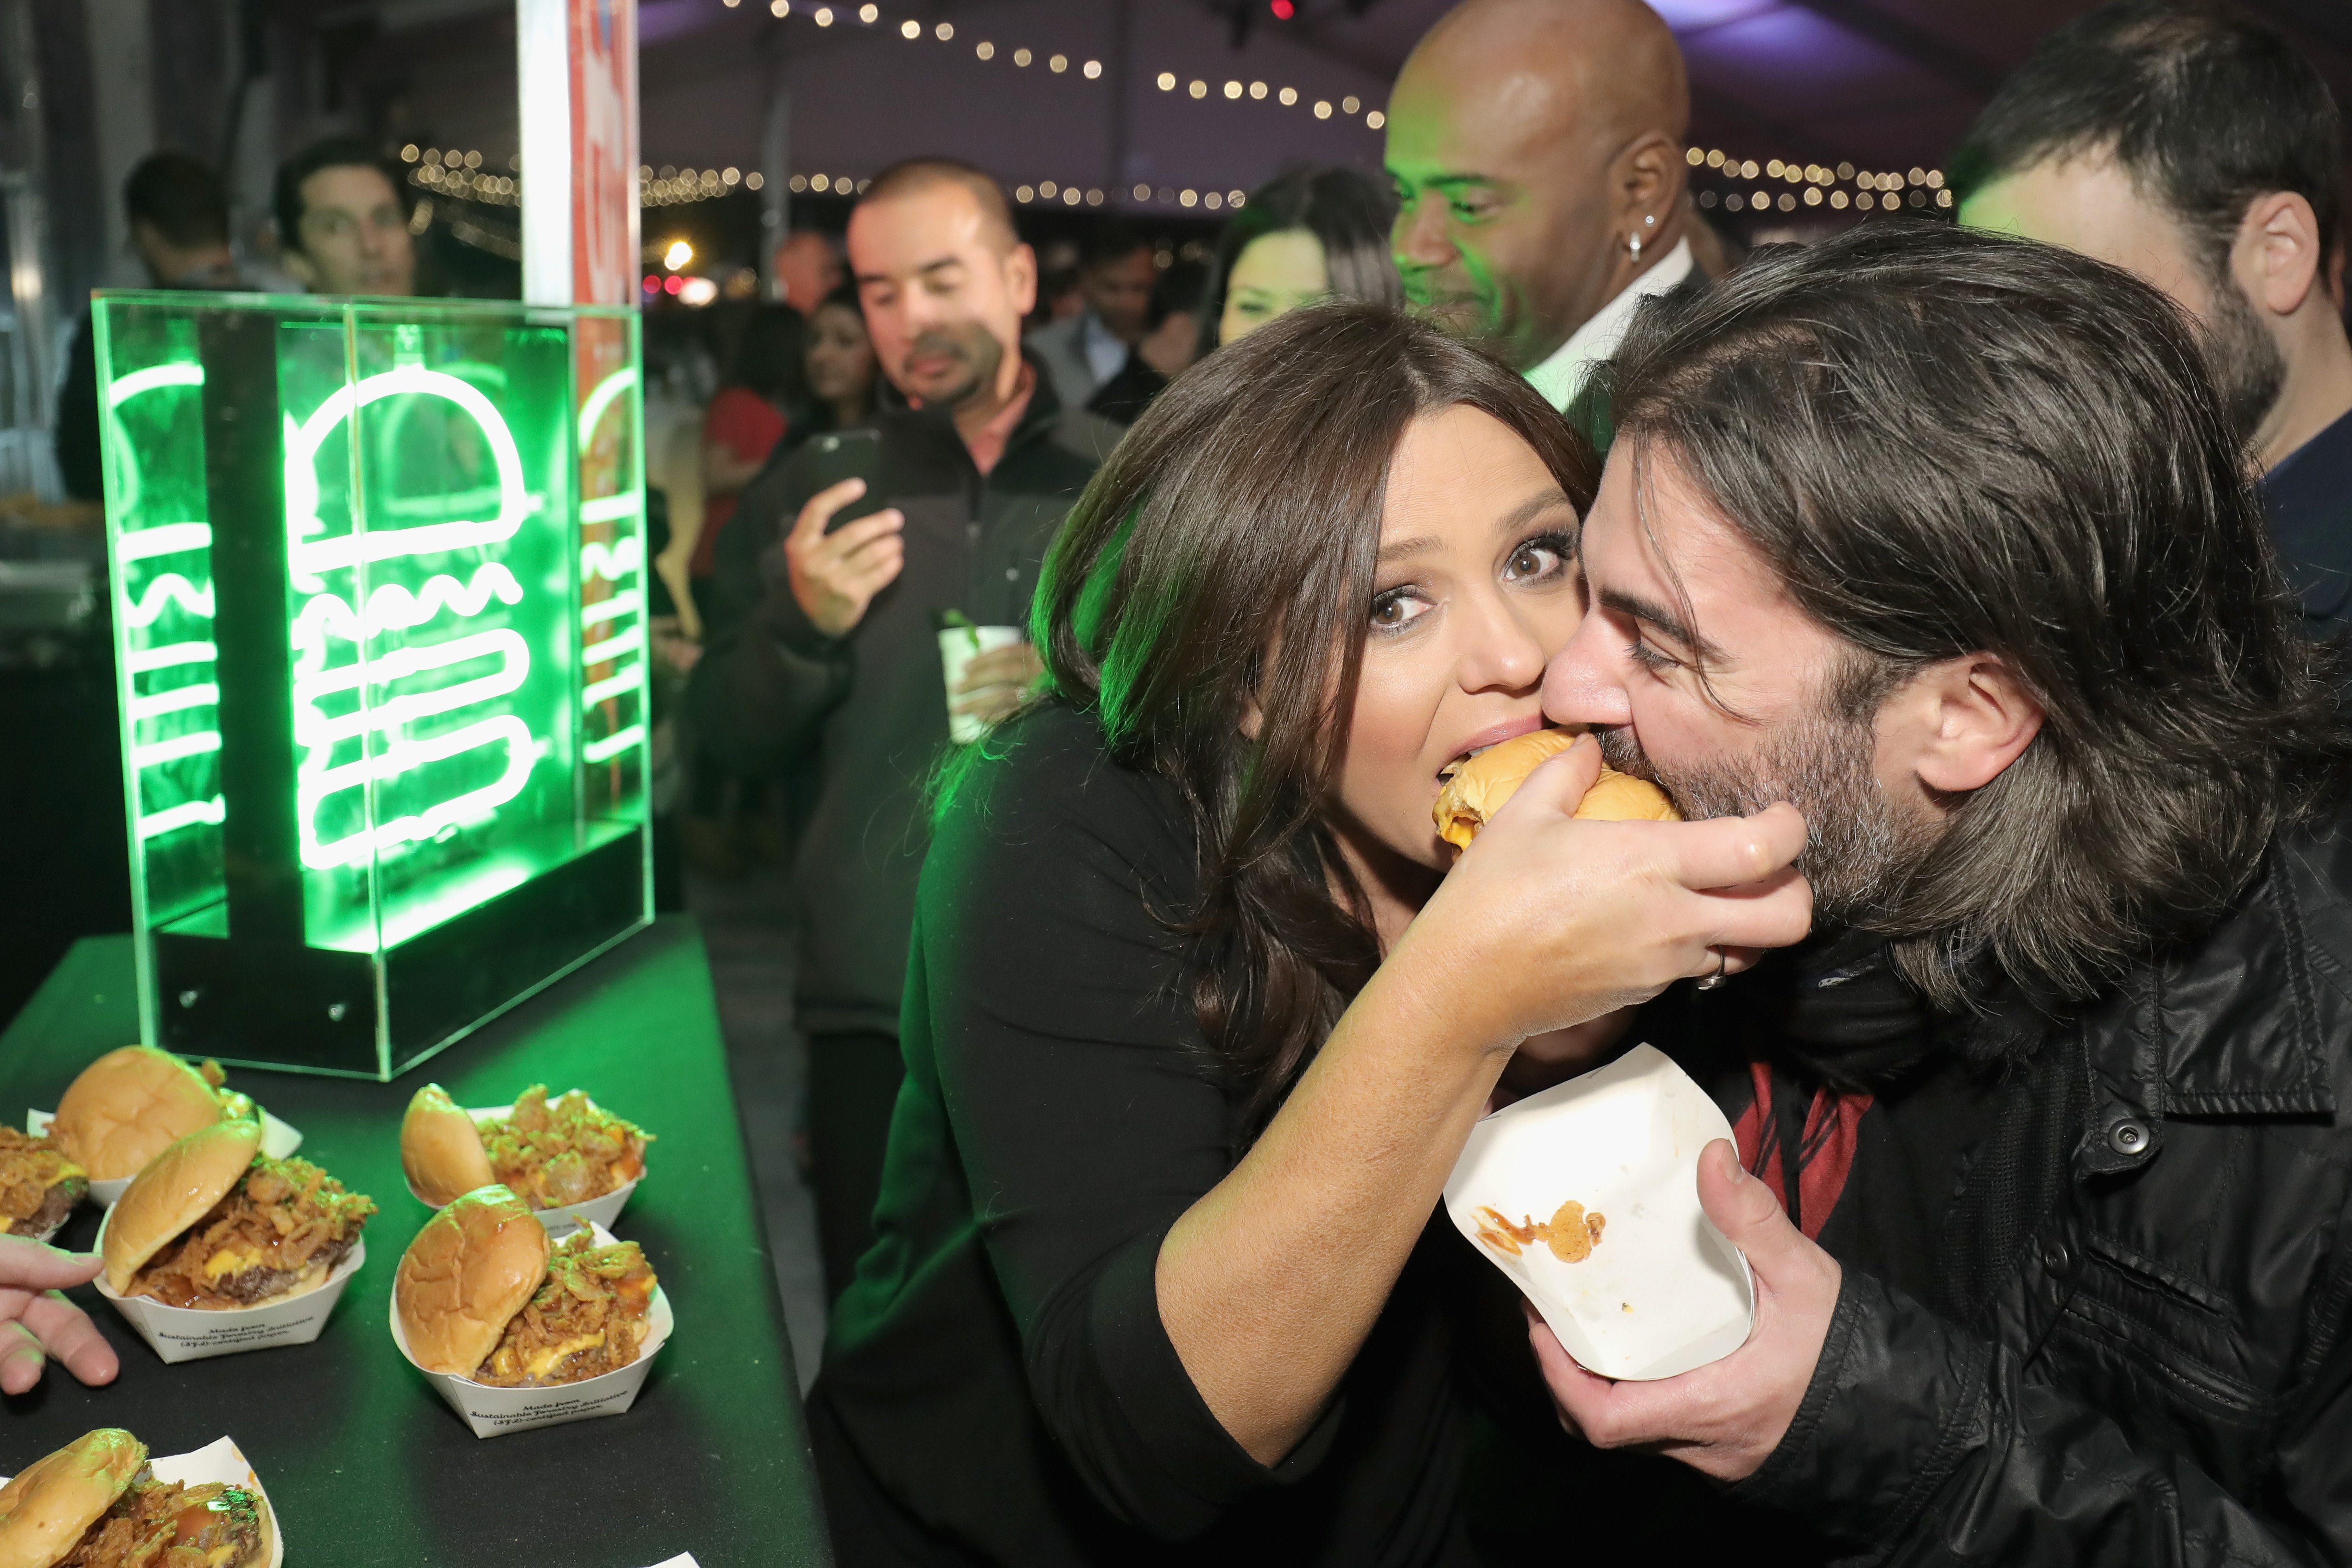 Rachel Ray and her husband John Cusimano dig into a burger at the Blue Moon Burger Bash hosted by Rachael Ray and the Food Network & Cooking Channel at the New York City Wine and Food Festival on October 16, 2016. | Source: Nielson Barnard/Getty Images